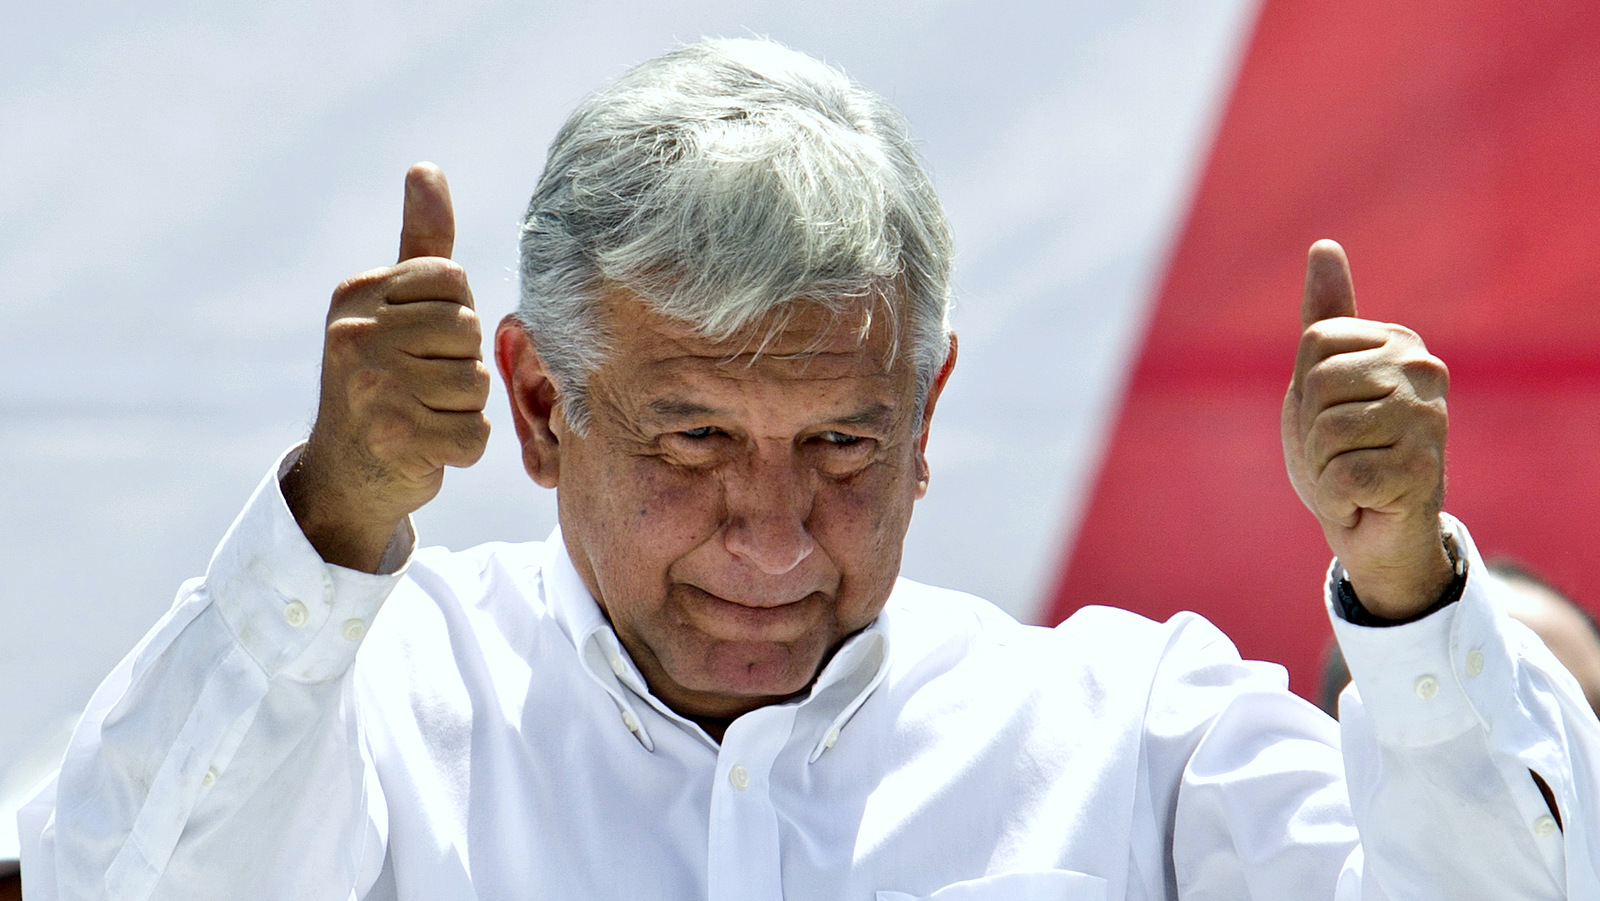 Andres Manuel Lopez Obrador, Mexican presidential candidate , gives a thumbs up to his supporters at Mexico City's main plaza, the Zocalo, Sunday, Sept. 9, 2012. (AP/Christian Palma)